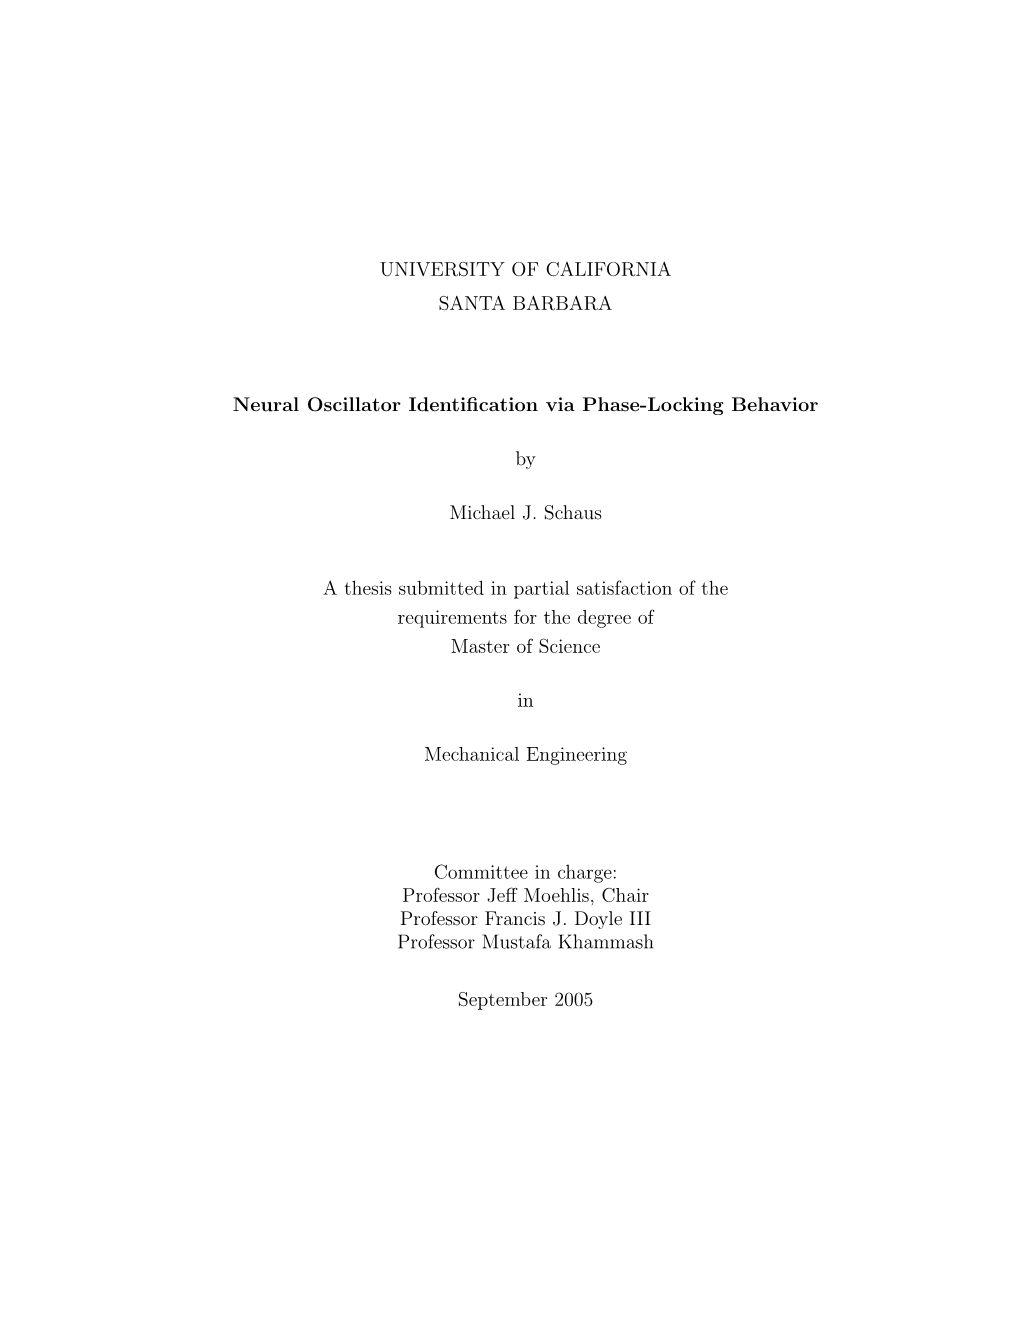 Thesis Submitted in Partial Satisfaction of the Requirements for the Degree of Master of Science